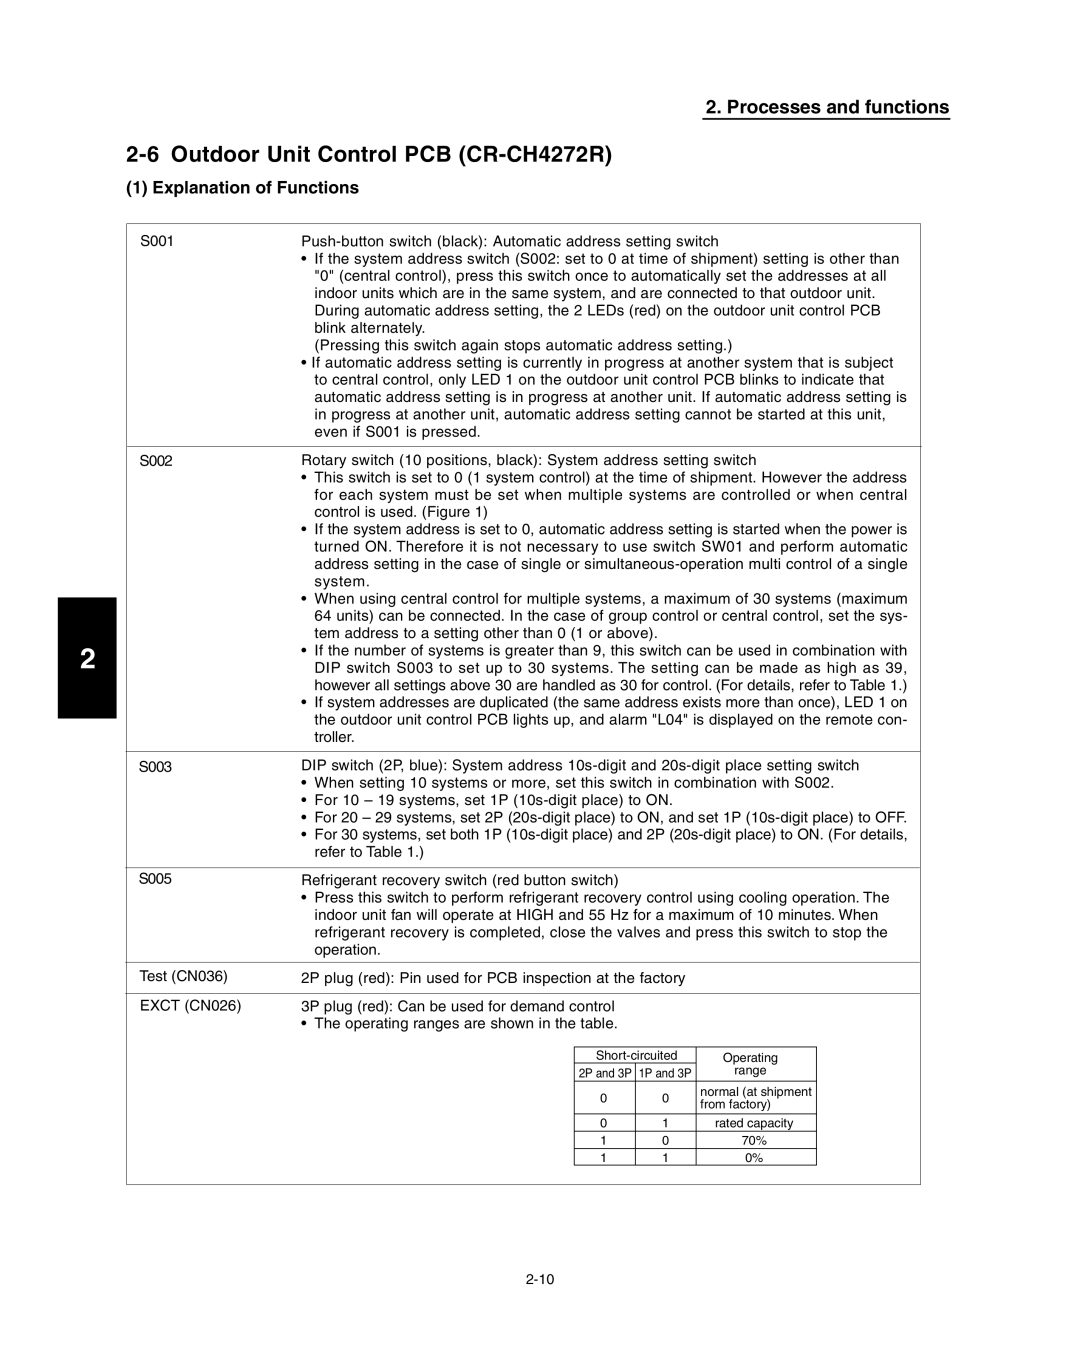 Panasonic R410A service manual 2-6Outdoor Unit Control PCB CR-CH4272R, Processes and functions, Explanation of Functions 